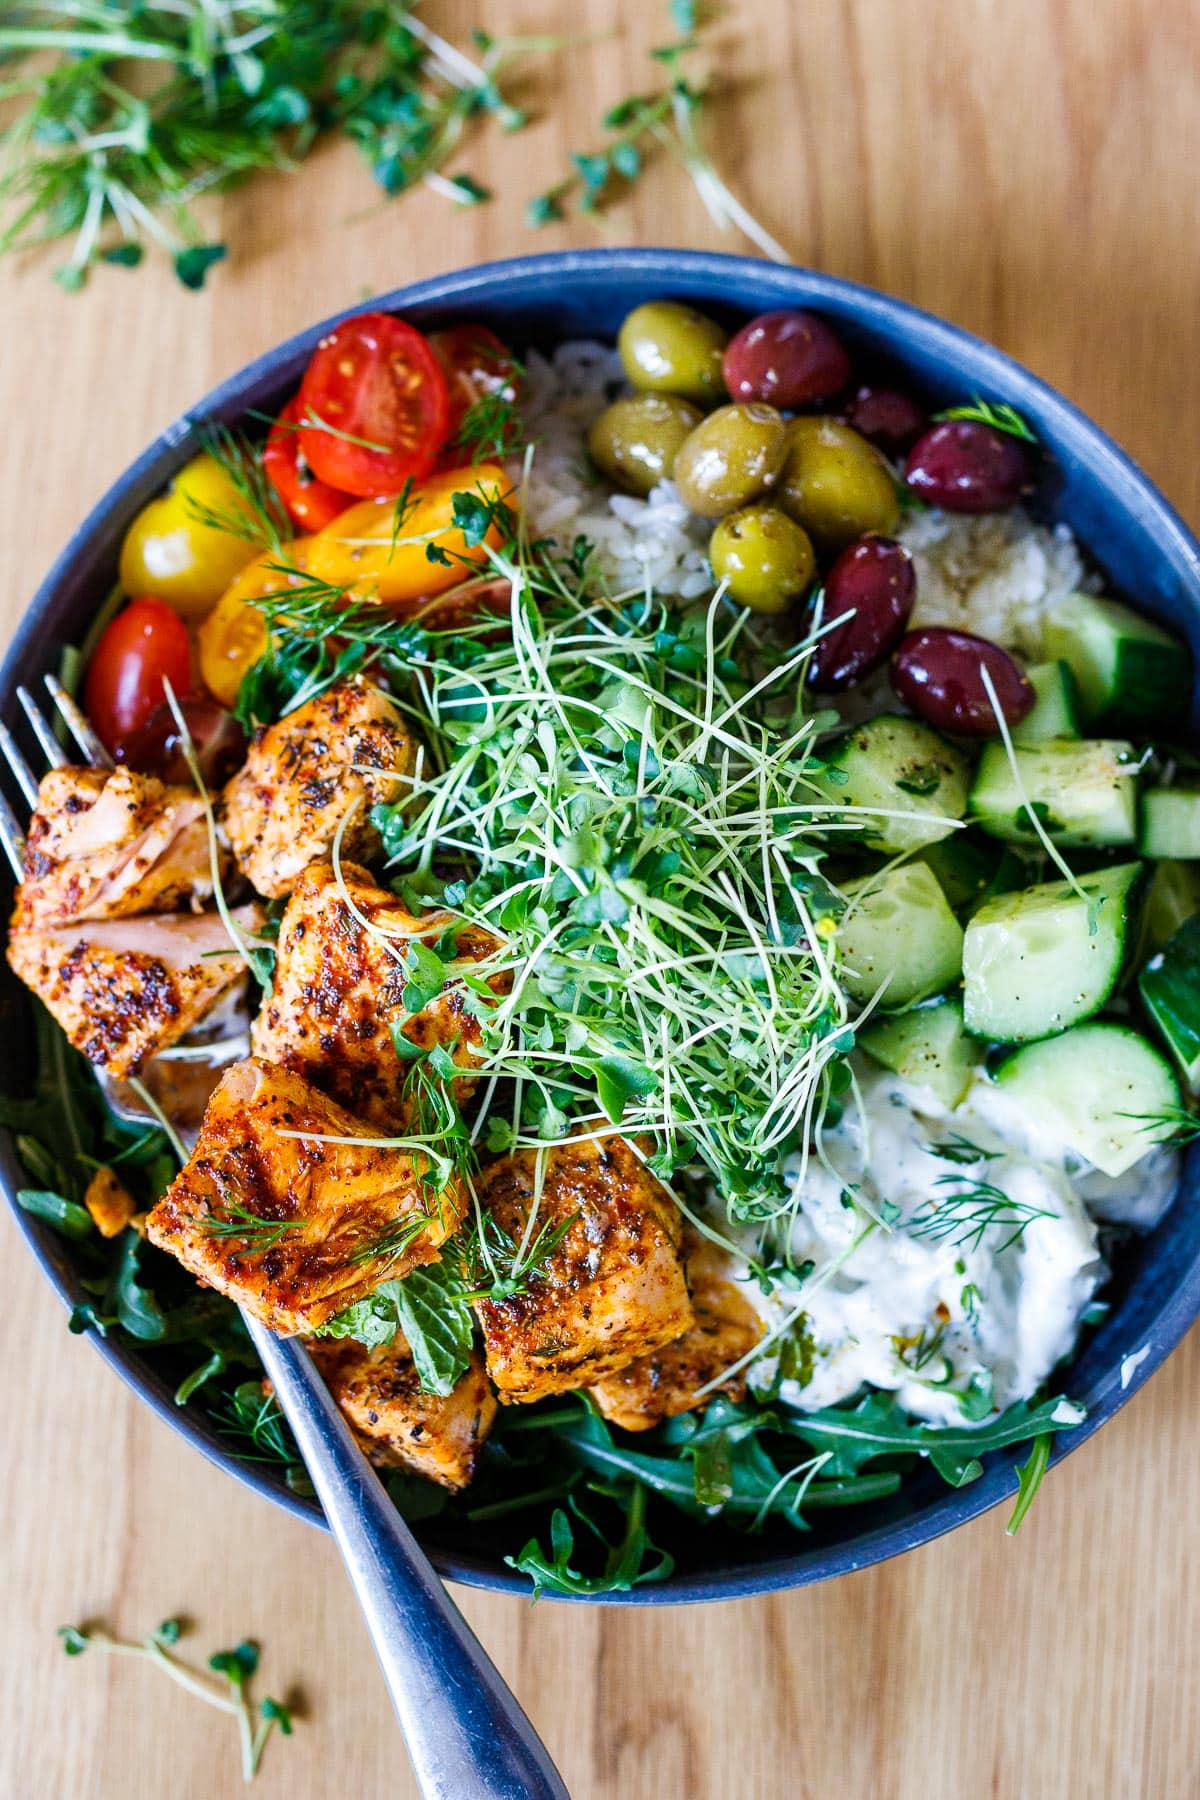 Delicious and healthy Greek Salmon Bowl with rice, greens, olives, tomatoes, cucumber, tzatziki and greek dressing.